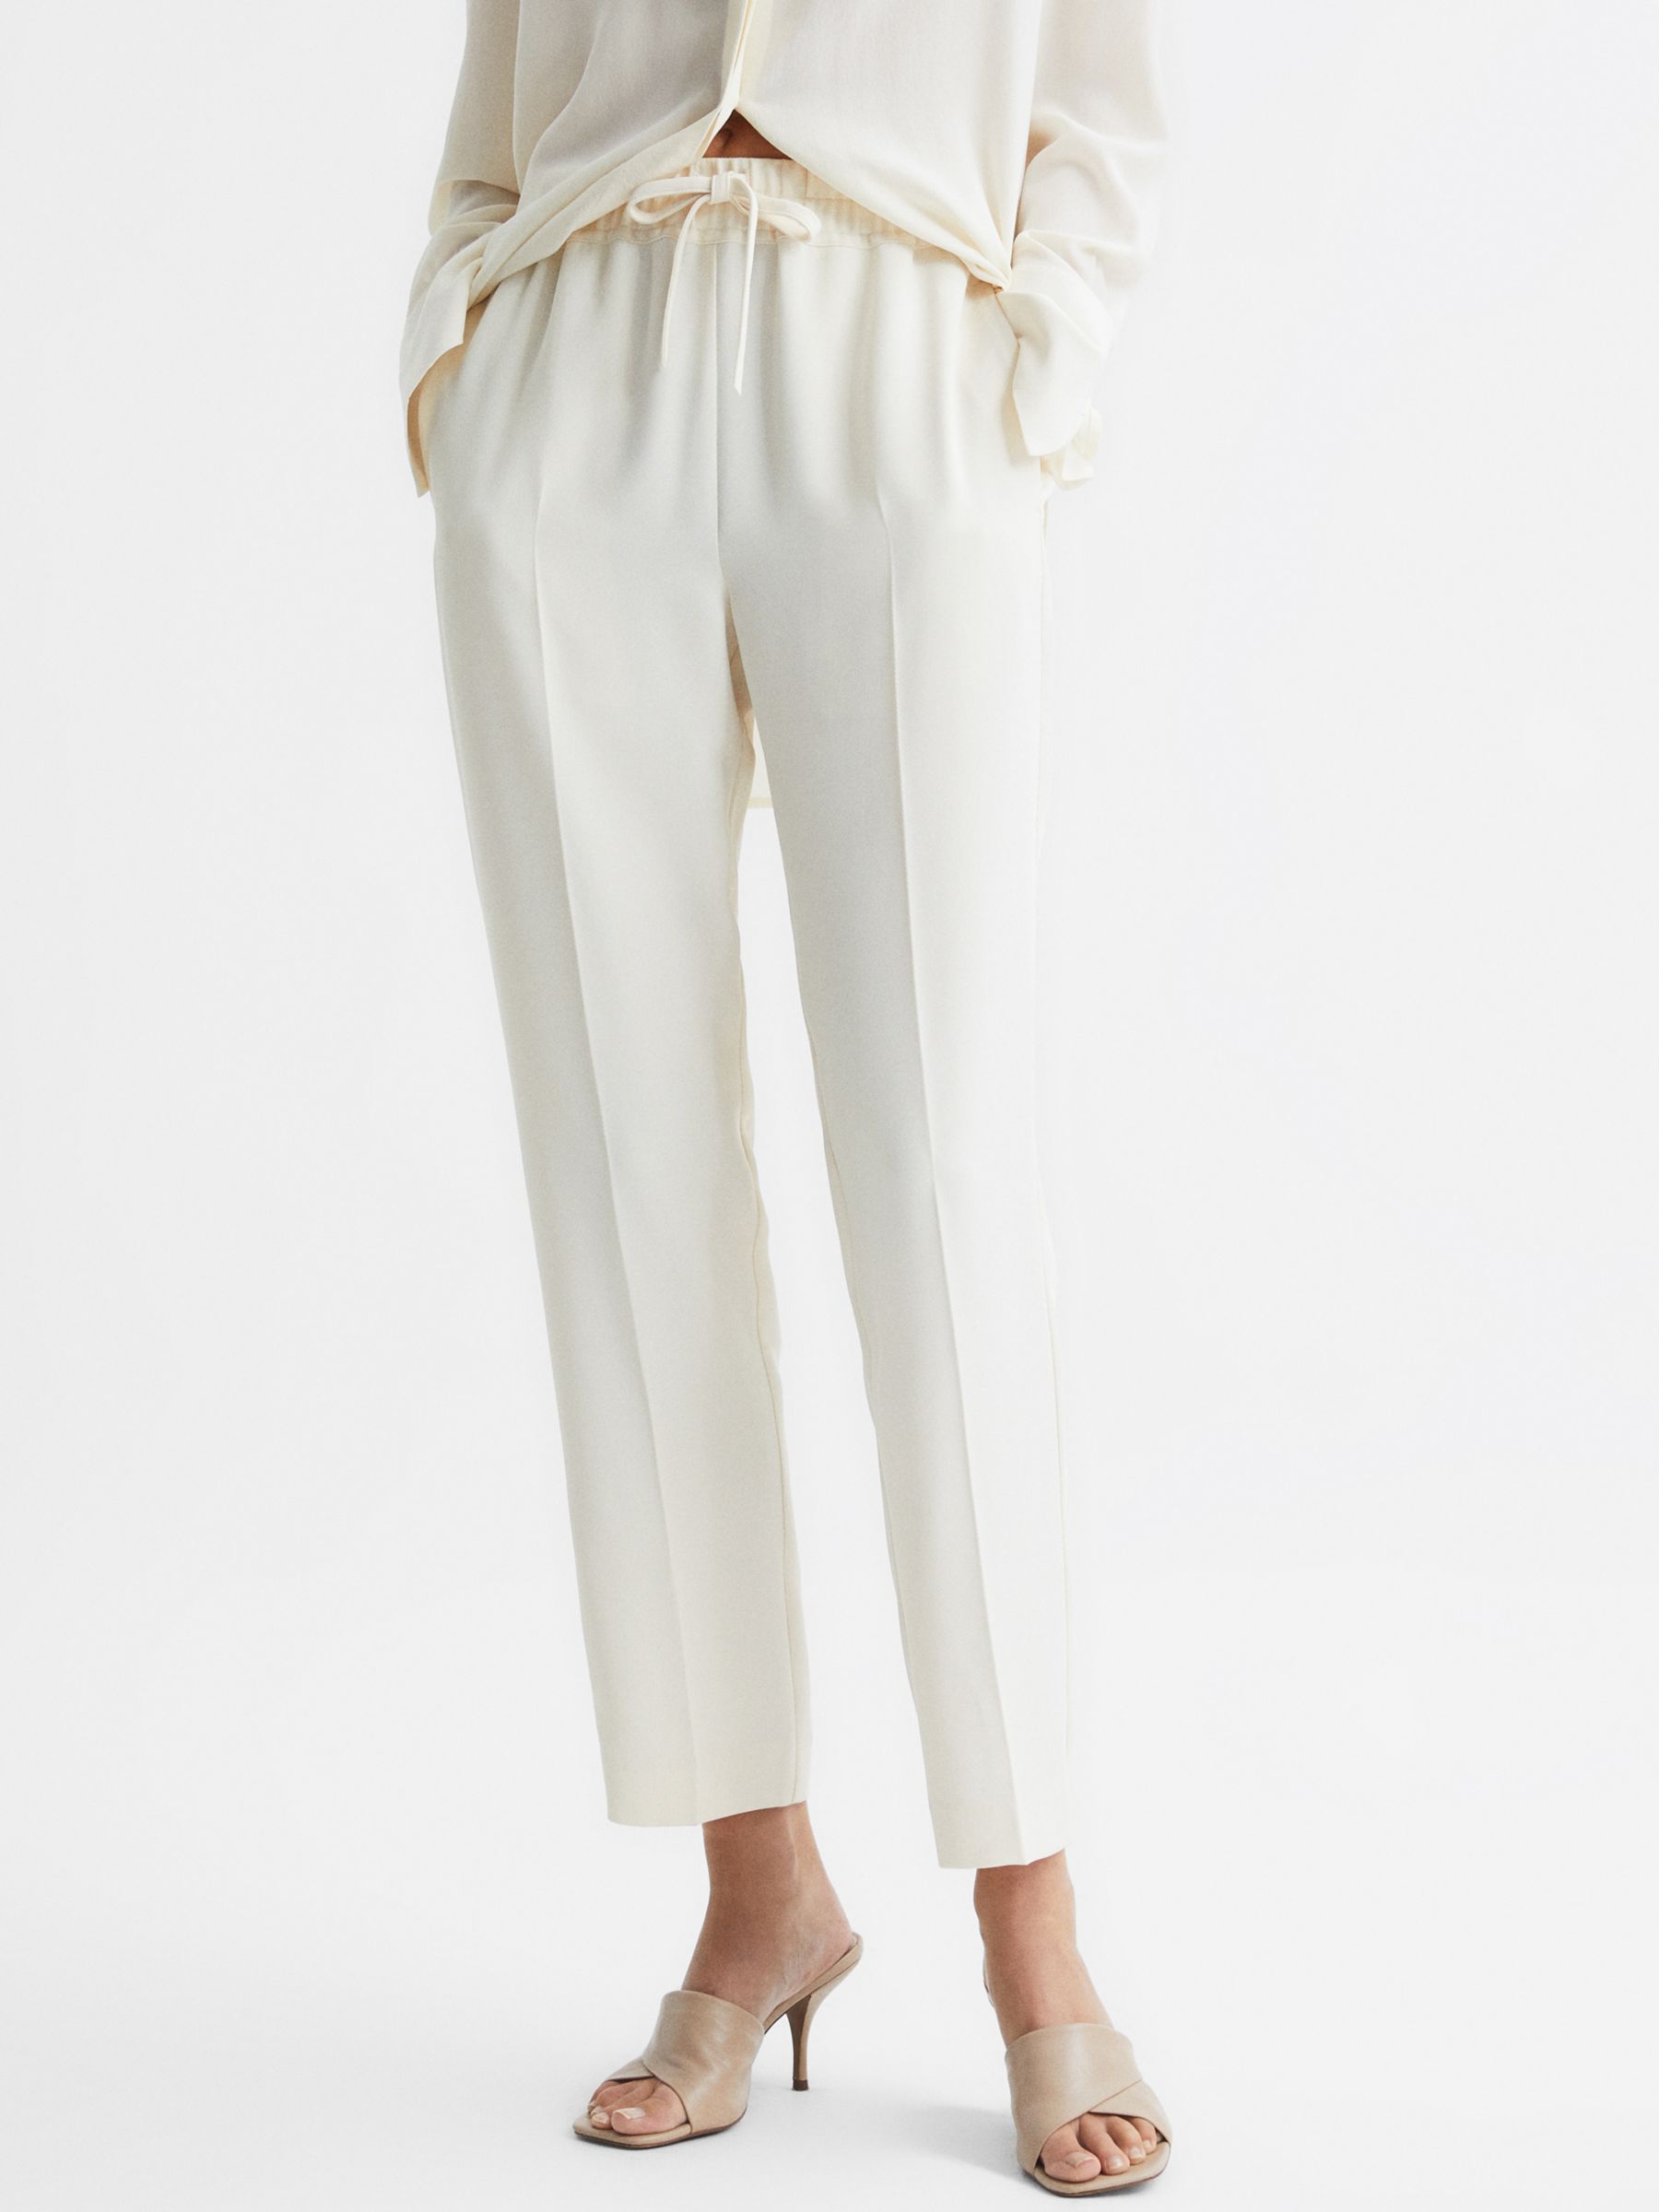 Reiss Hailey Pull On Trousers, Cream, 6